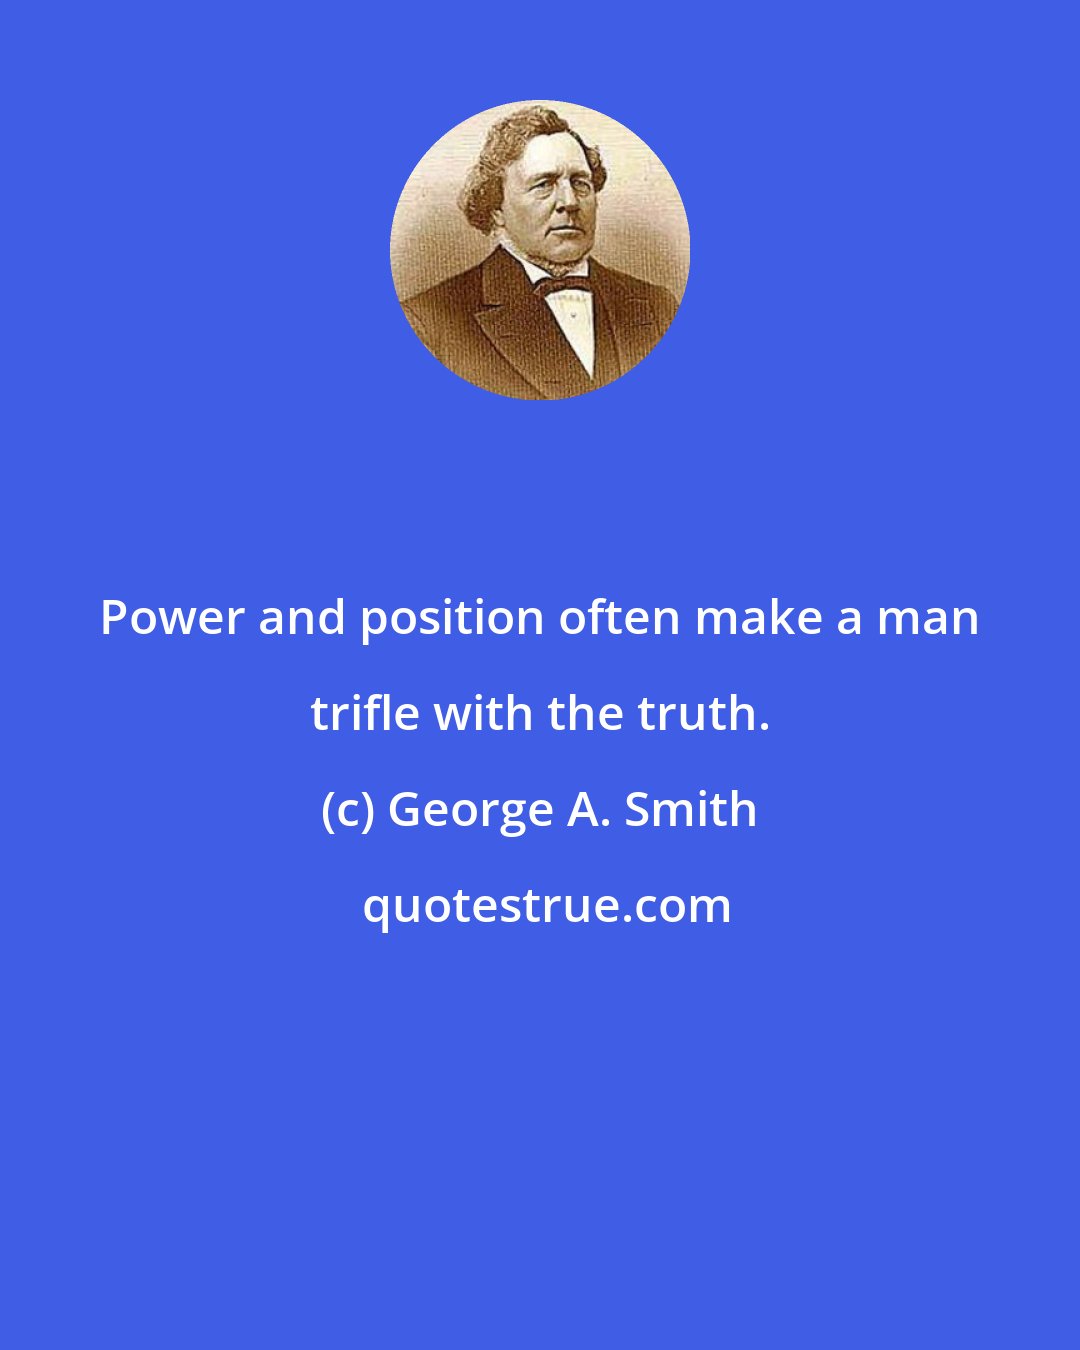 George A. Smith: Power and position often make a man trifle with the truth.